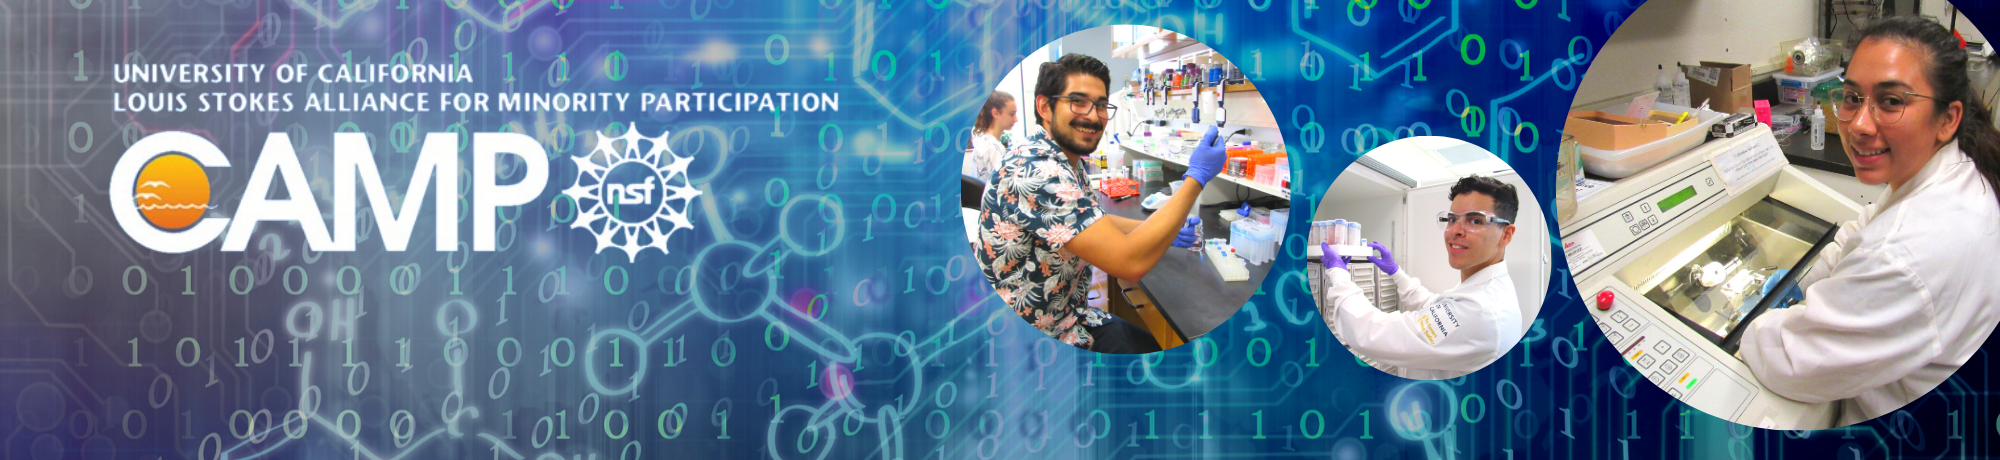 NSF LSAMP/CAMP logo and wordmark with three round shaped photos of student researchers in lab on a backround of blues and floating science notations